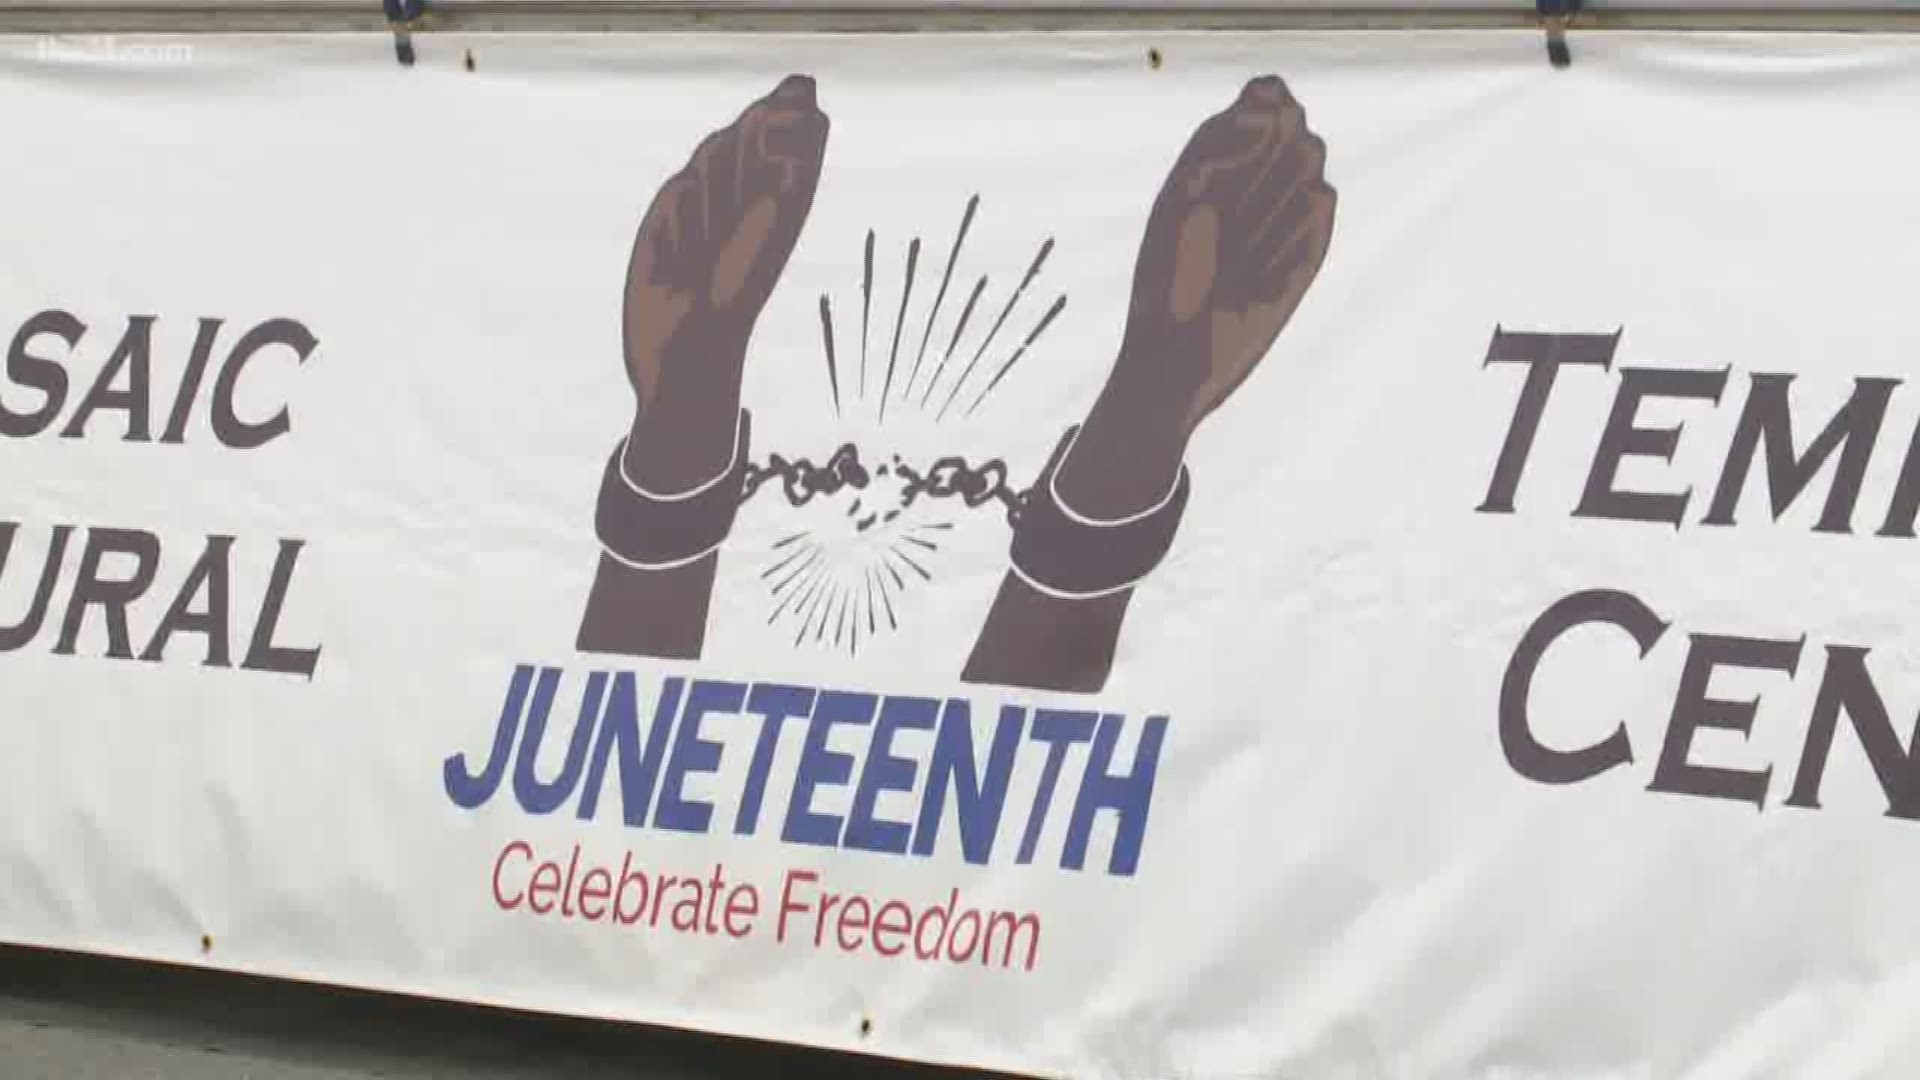 Juneteenth, this Tuesday, June 19, celebrates 153 years since the end of slavery.